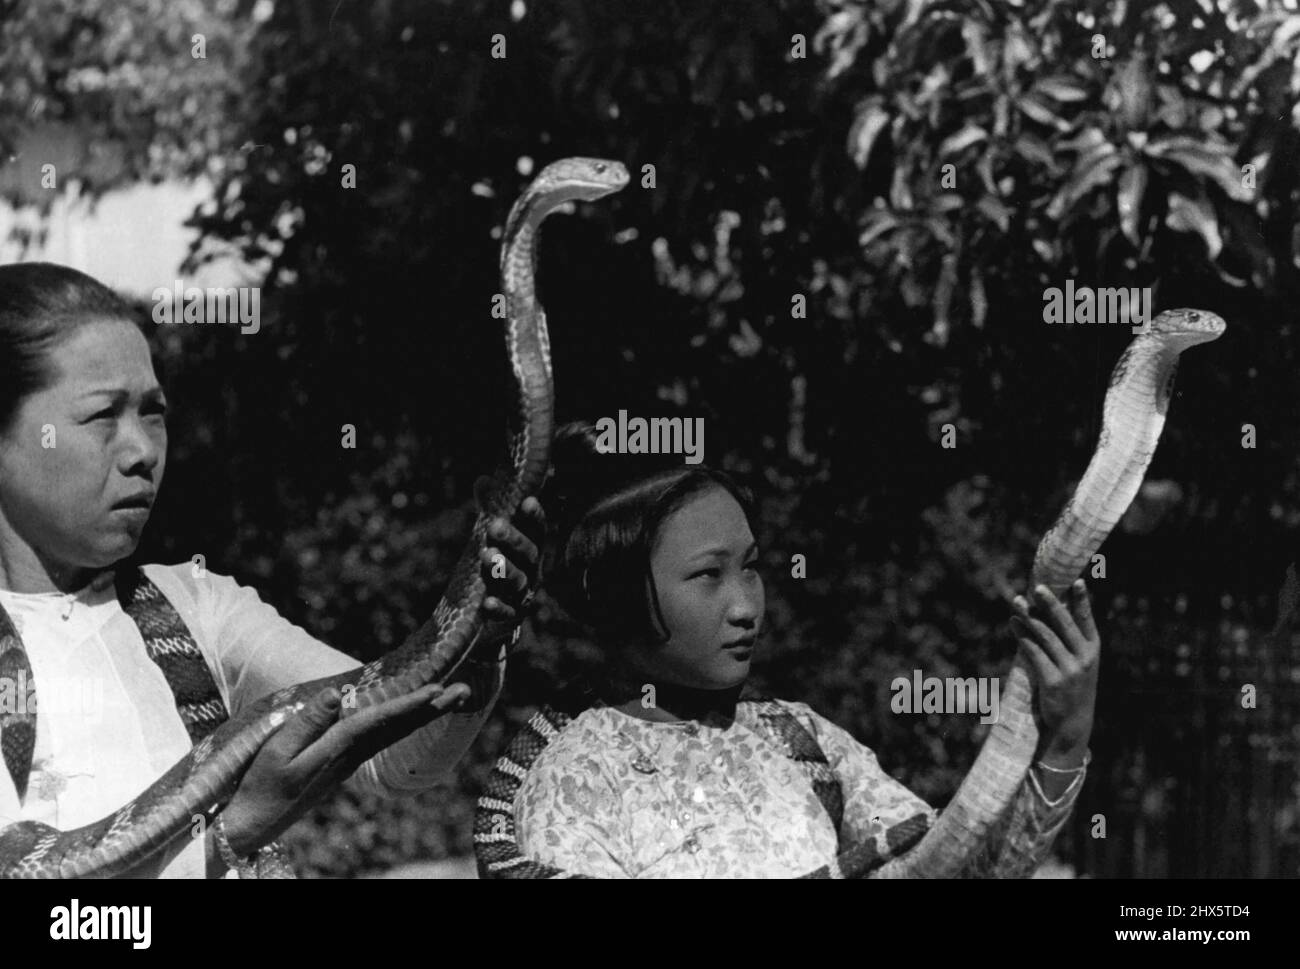 Ma Ohn Sein, wife of the snake charmer, and their daughter demonstrate how easy it is for the initiated to hold deadly snakes. The snake charmers smear themselves with an anti-venom vaccine before a performance, but a bite can still be fatal. May 18, 1949. (Photo by Henri Cartier-Bresson, Magnum Photos Inc.). Stock Photo